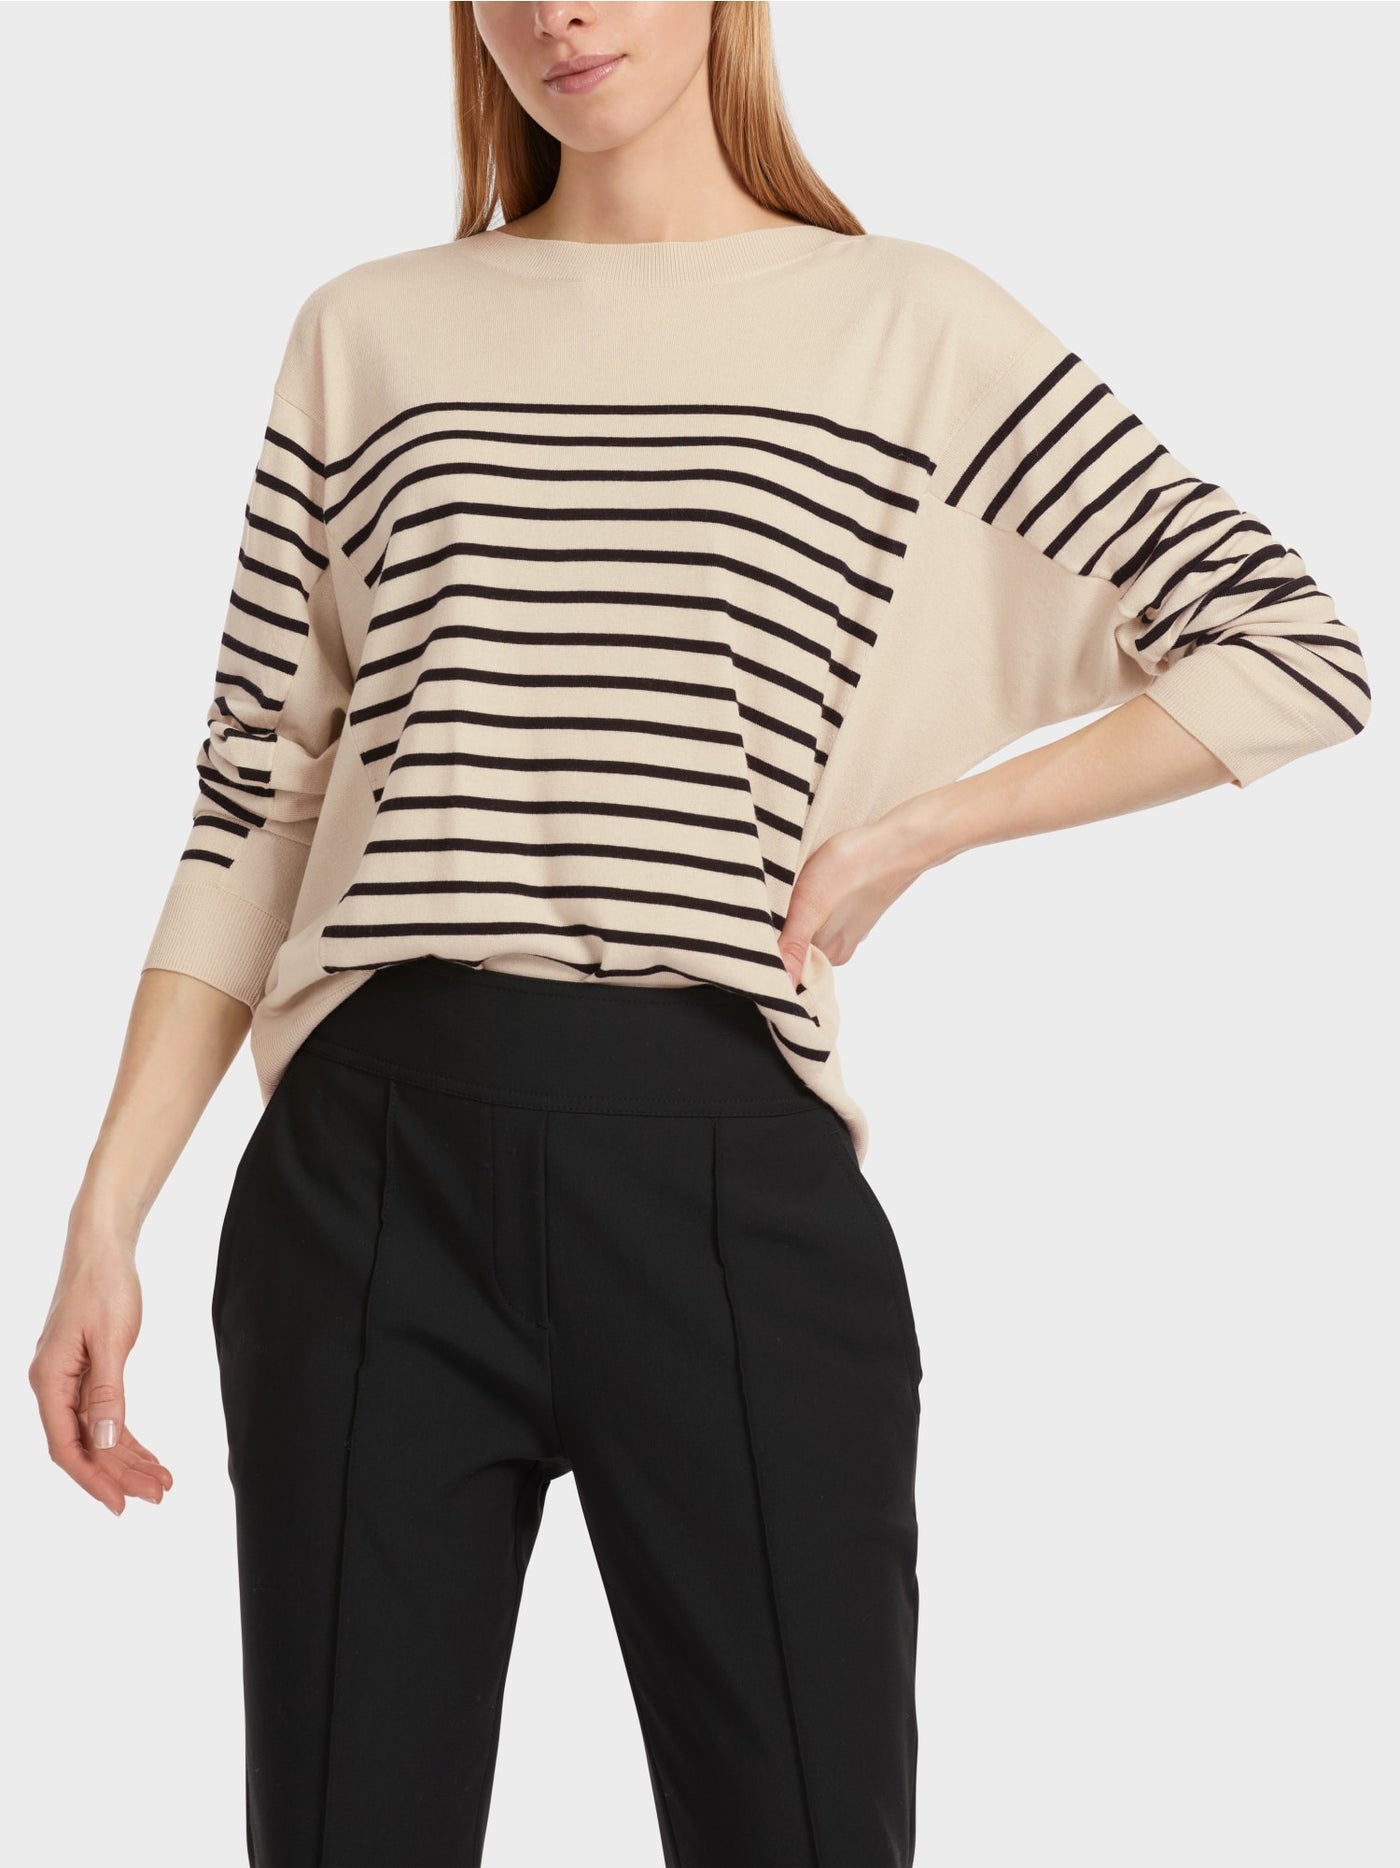 Marc Cain Striped "Rethink Together” sweater